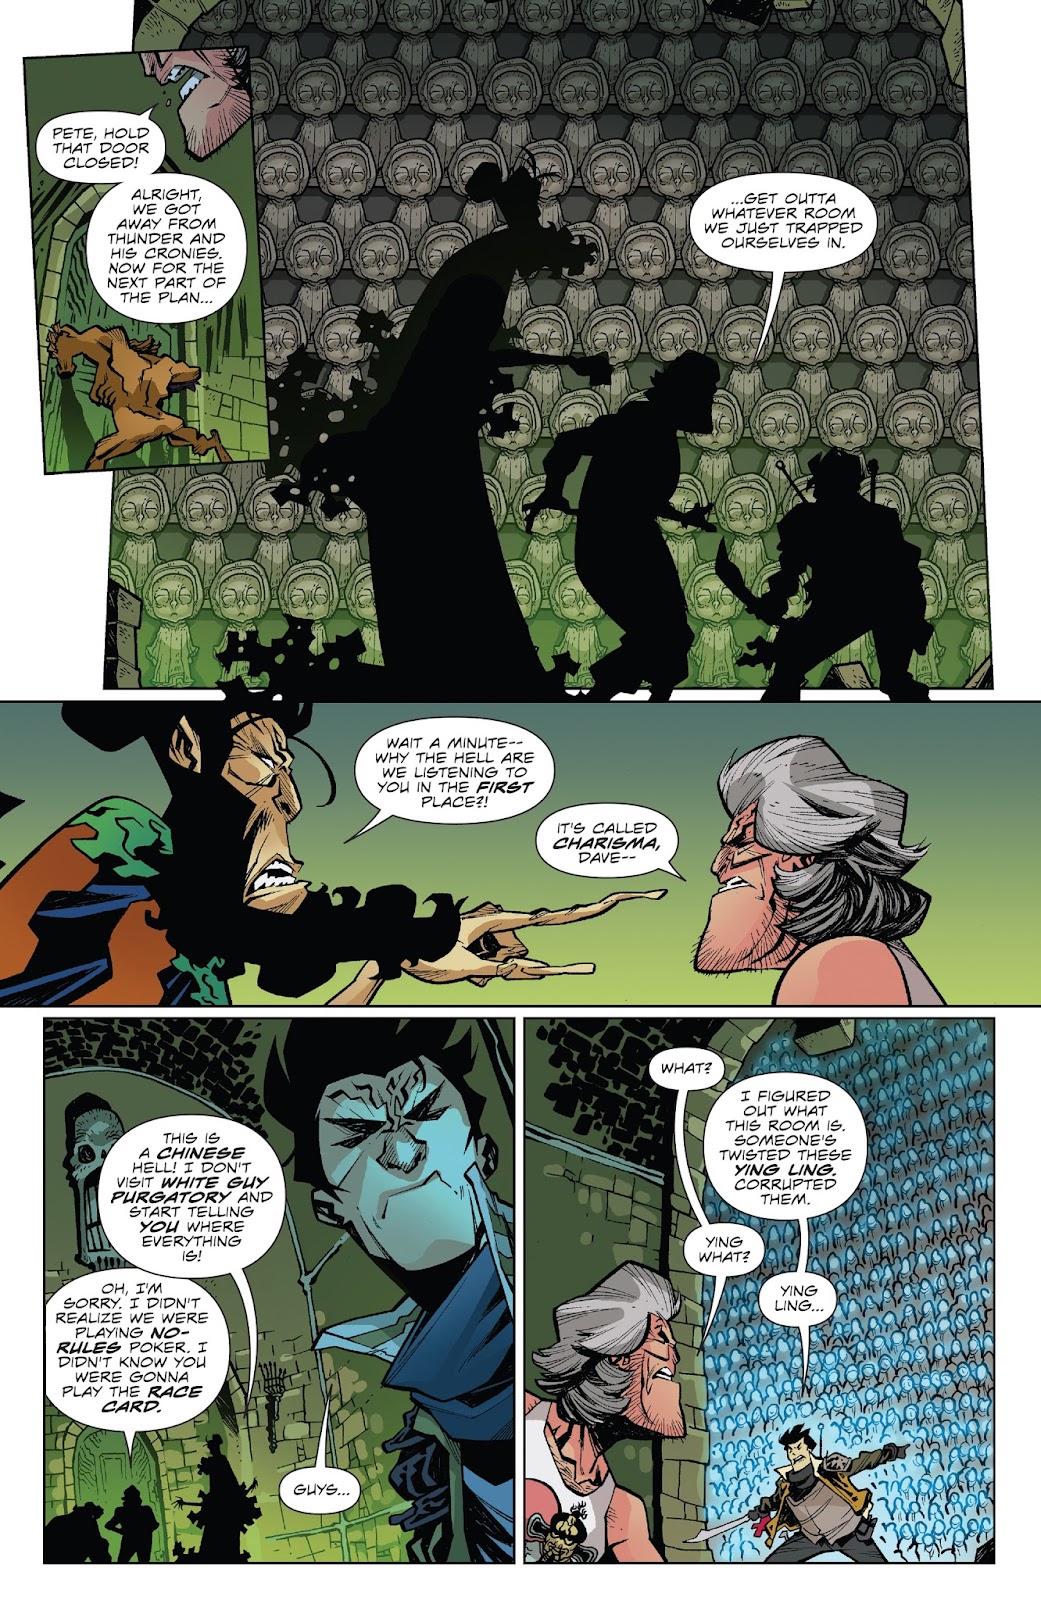 Big Trouble in Little China: Old Man Jack issue 7 - Page 6